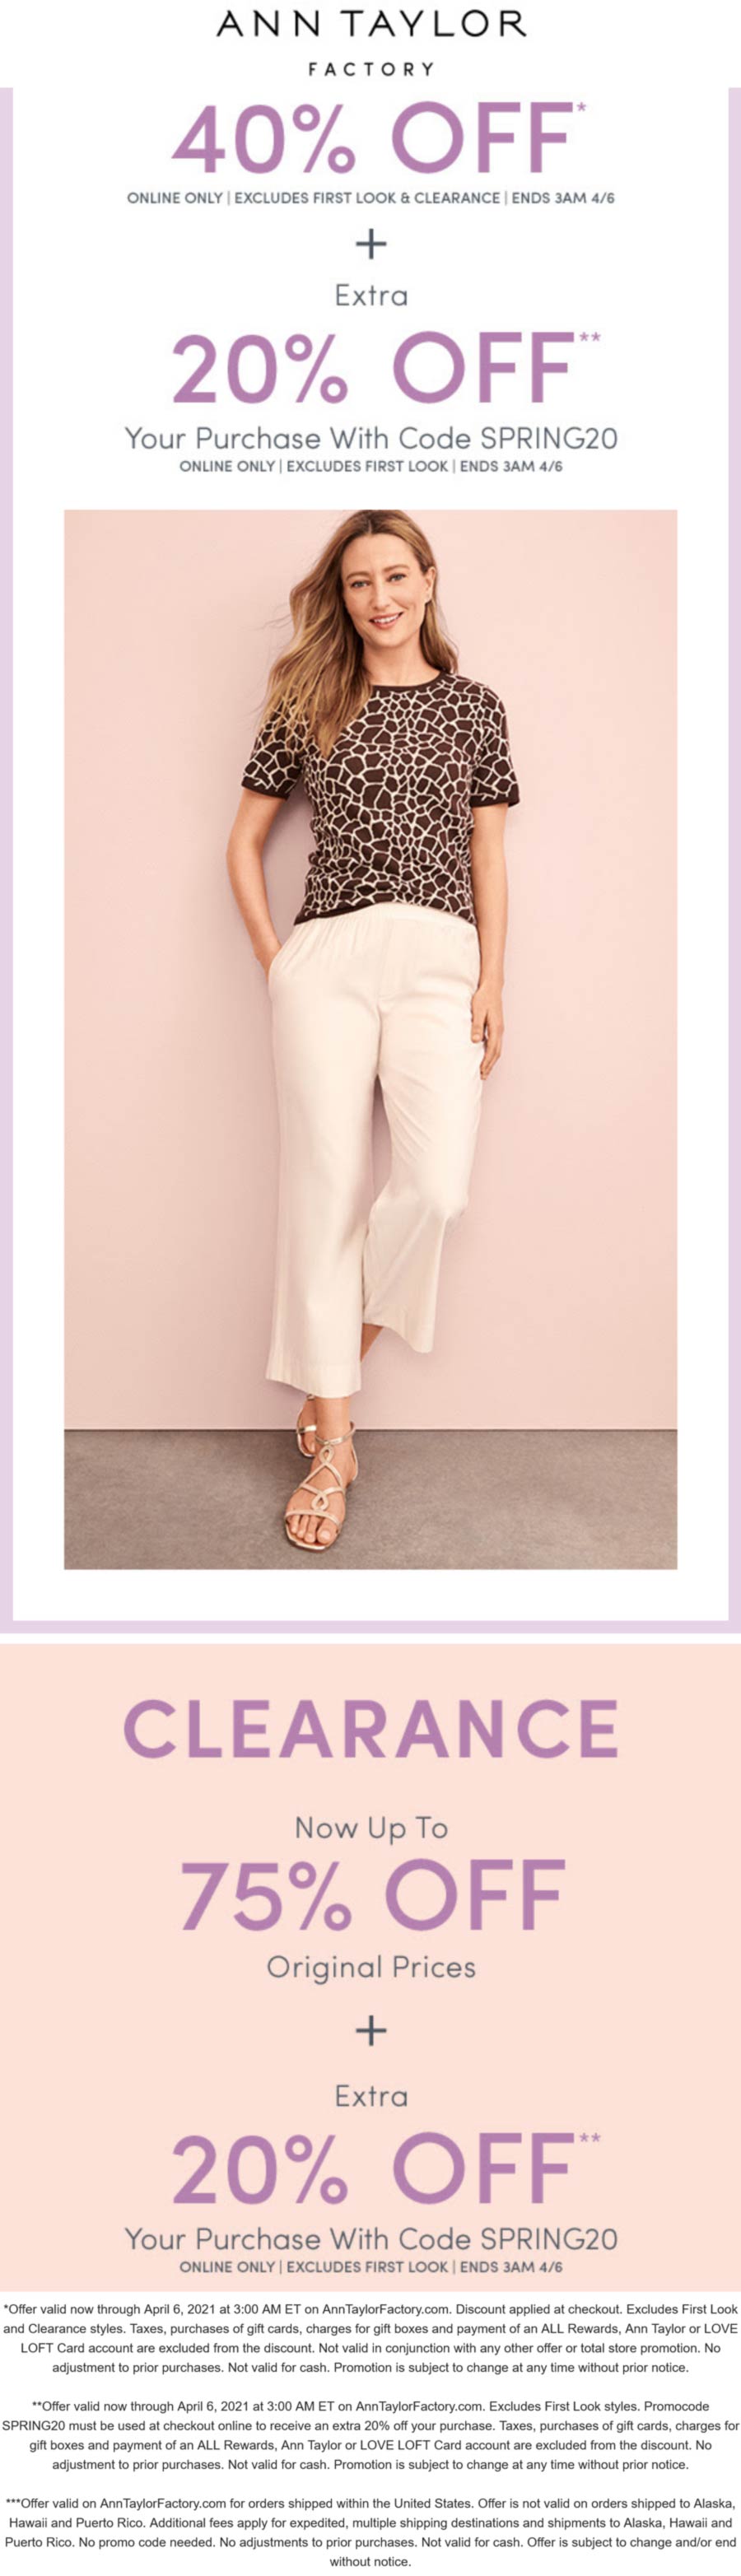 Ann Taylor Factory stores Coupon  60% off online at Ann Taylor Factory via promo code SPRING20 #anntaylorfactory 